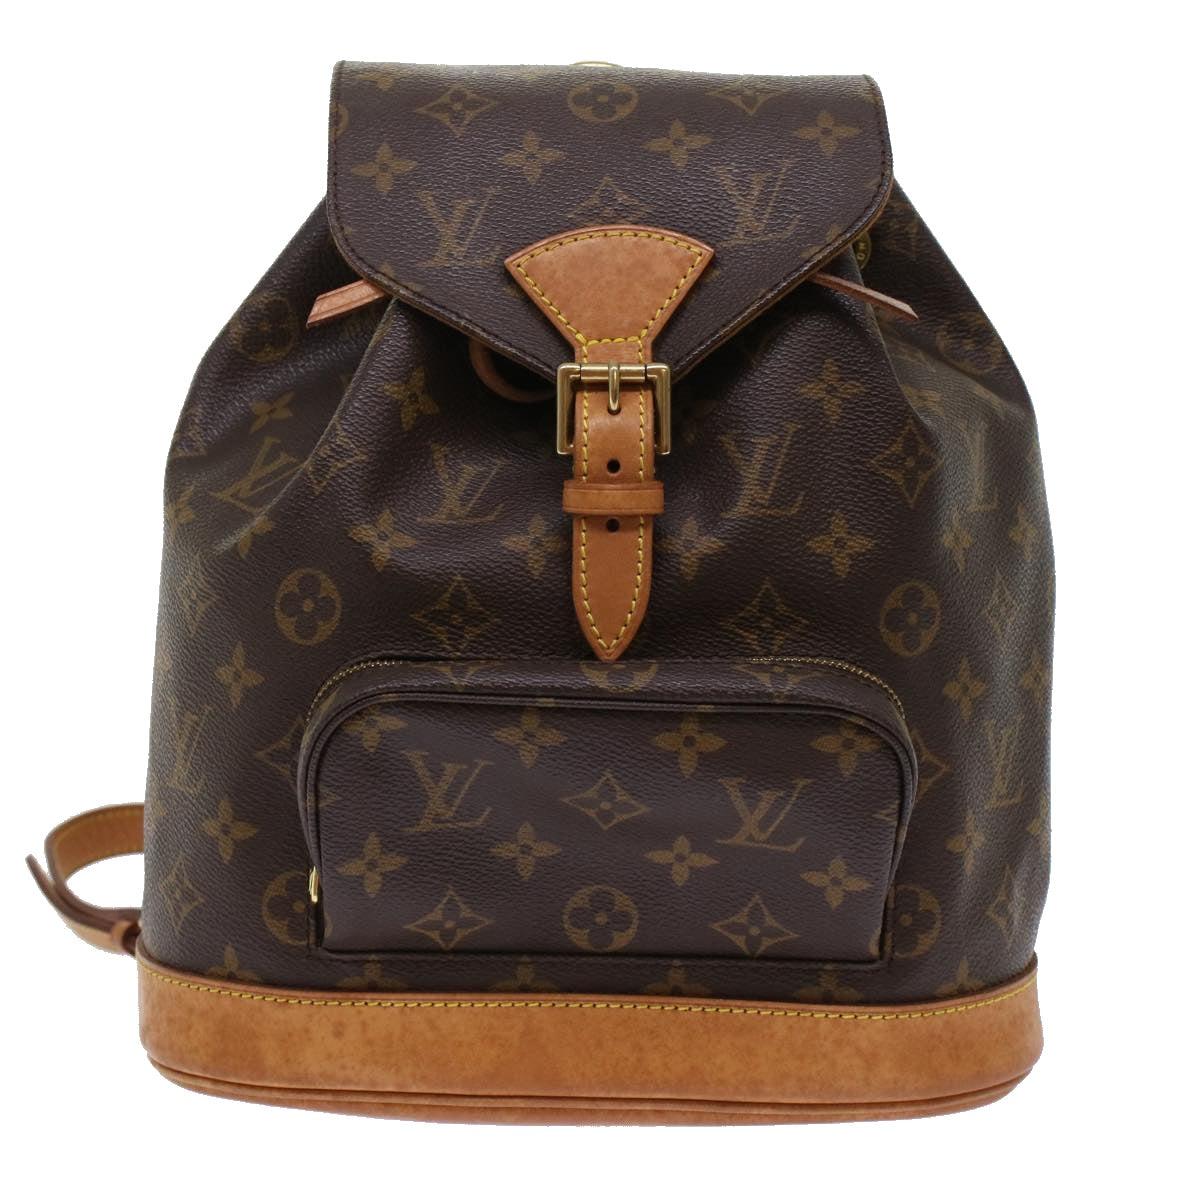 louis vuitton backpack second hand